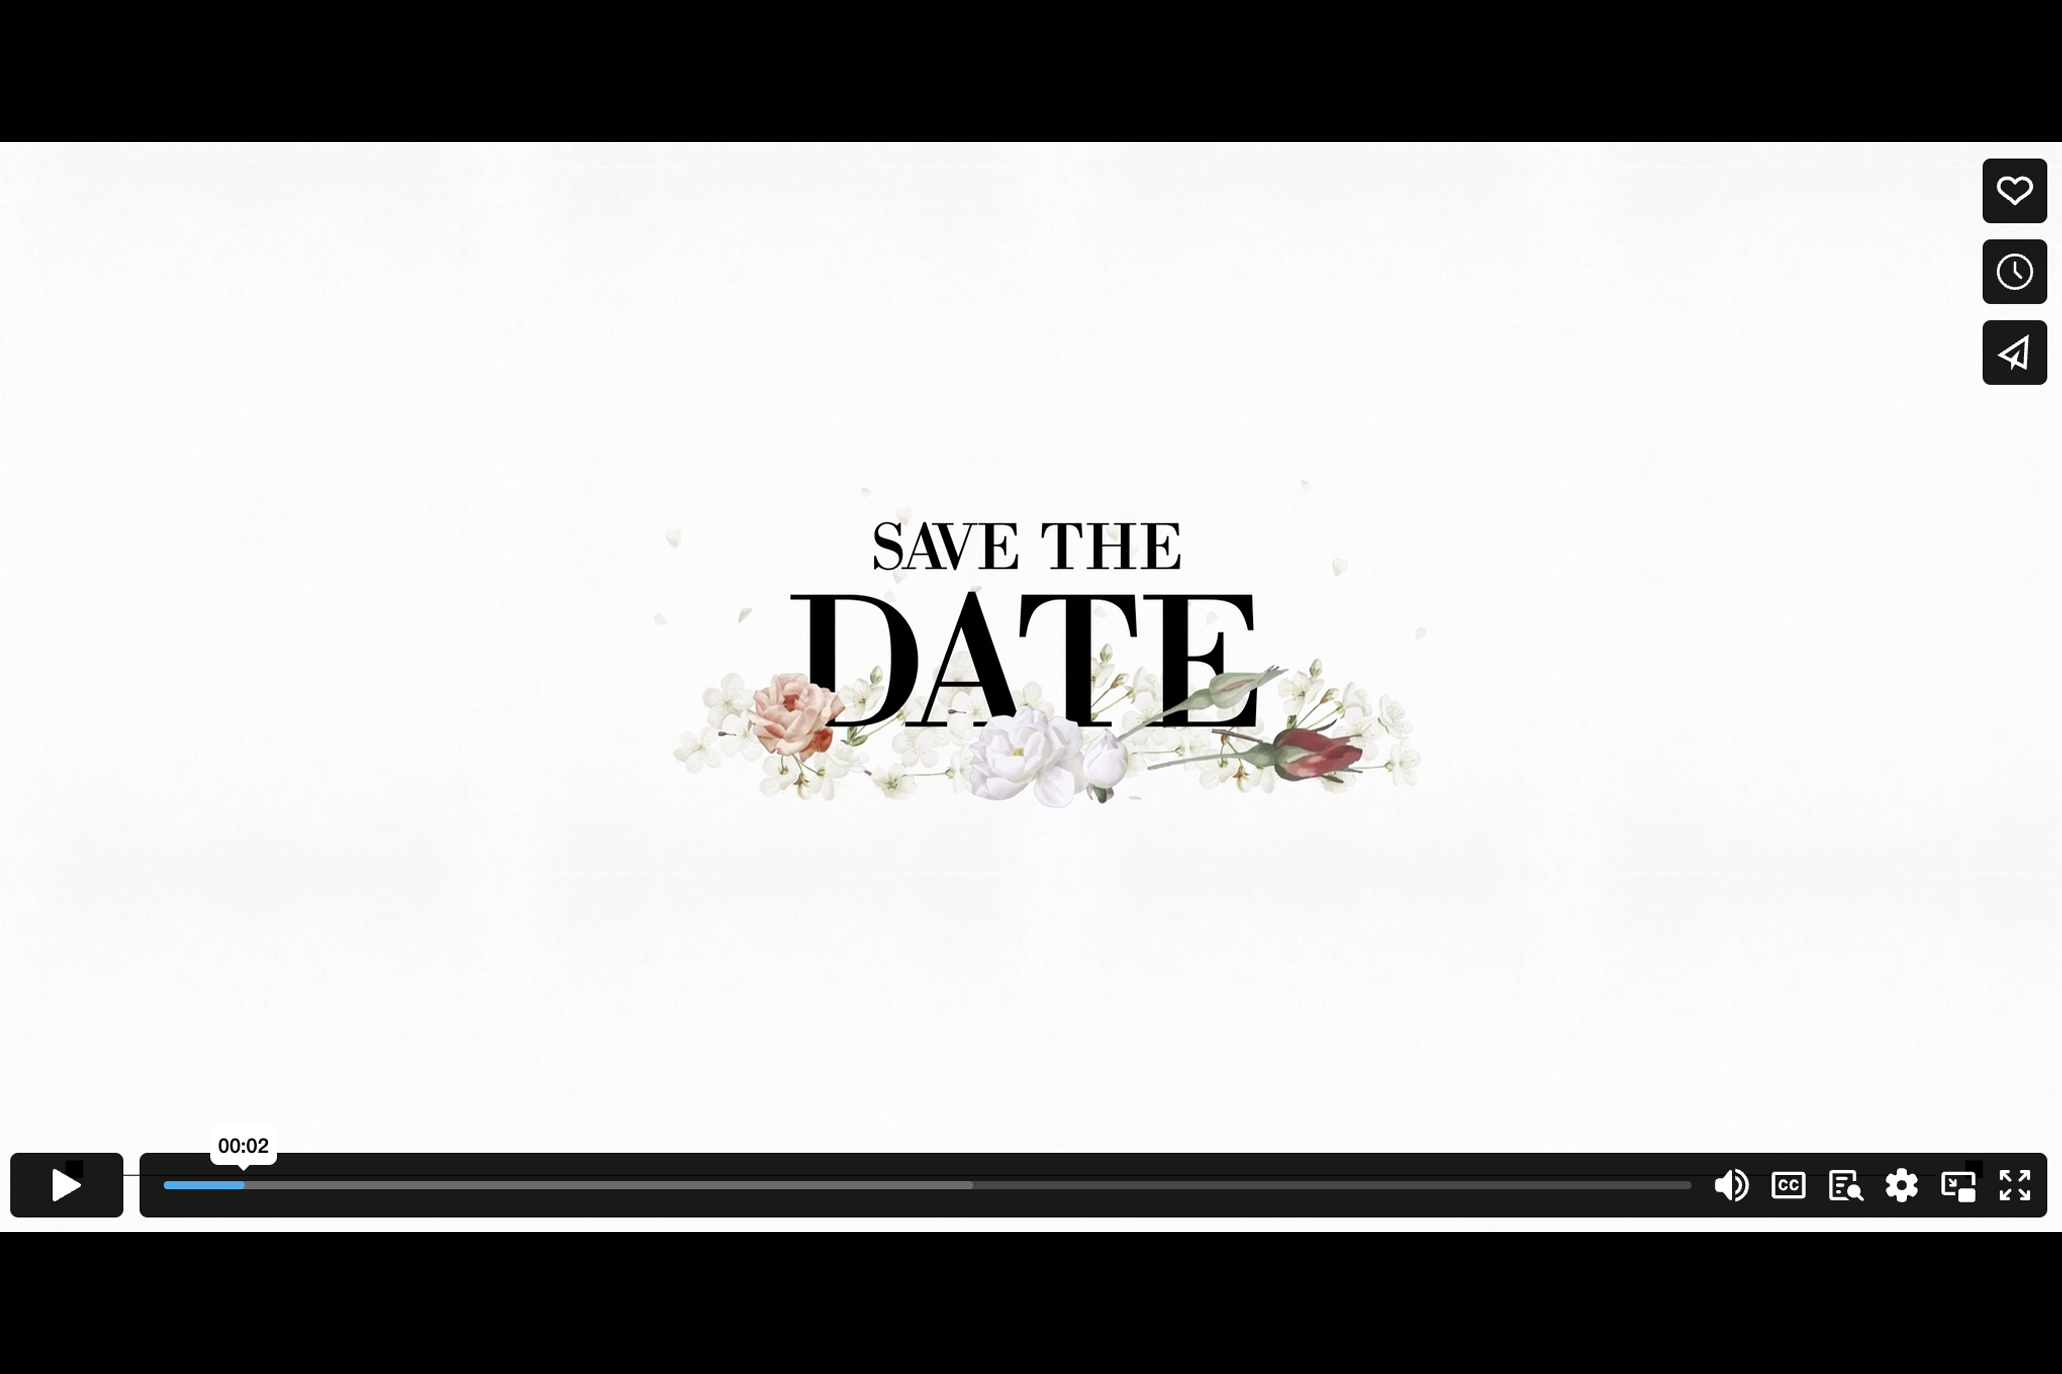 Save the date video_image 1